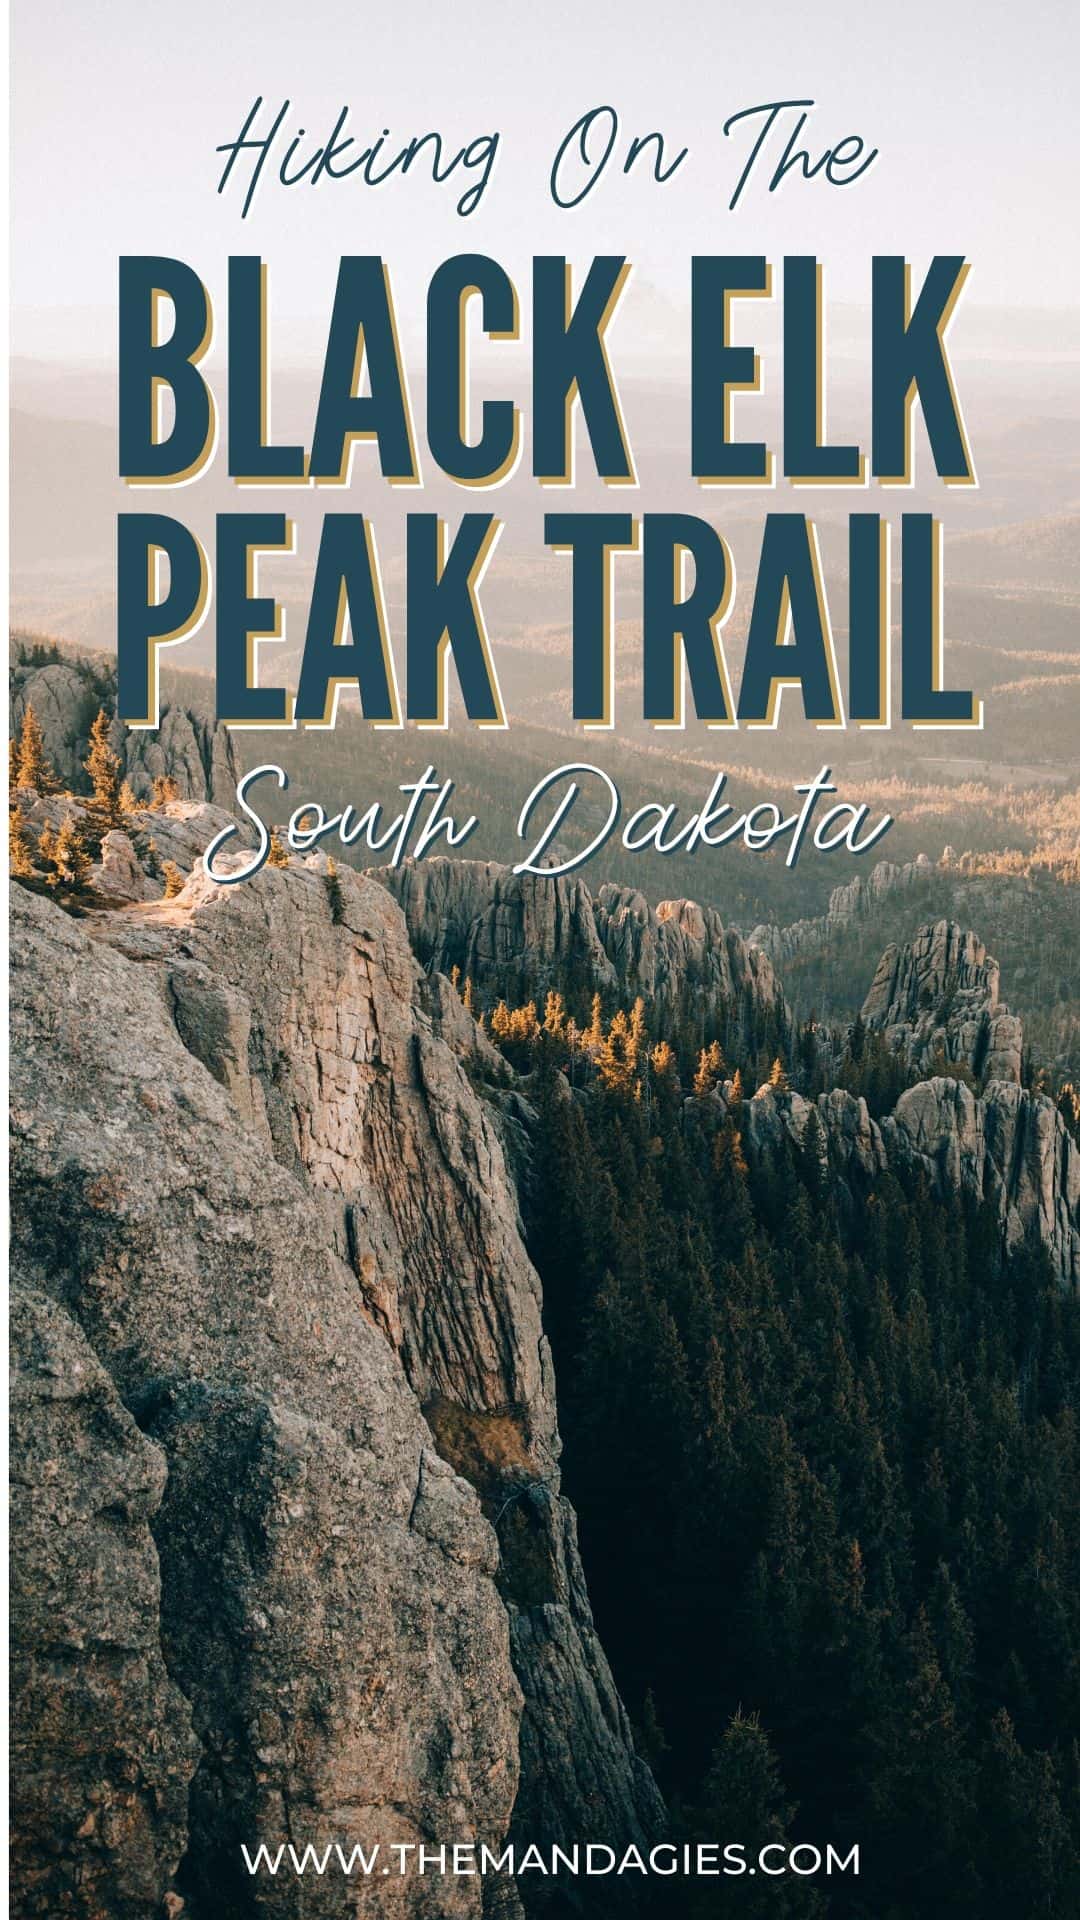 Hiking Black Elk Peak Trail is South Dakota is one of the coolest things you can do in the state! This historic hike is full of amazing sights, fire towers, Lakota tribe prayer flags, and surrounded by so much beauty. Save this post for your next cross country road trip and don't forget to stop by Custer State Park! #southdakota #blackelkpeak #mountrushmore #custerstatepark #hiking #nature #travel #photography #sunset